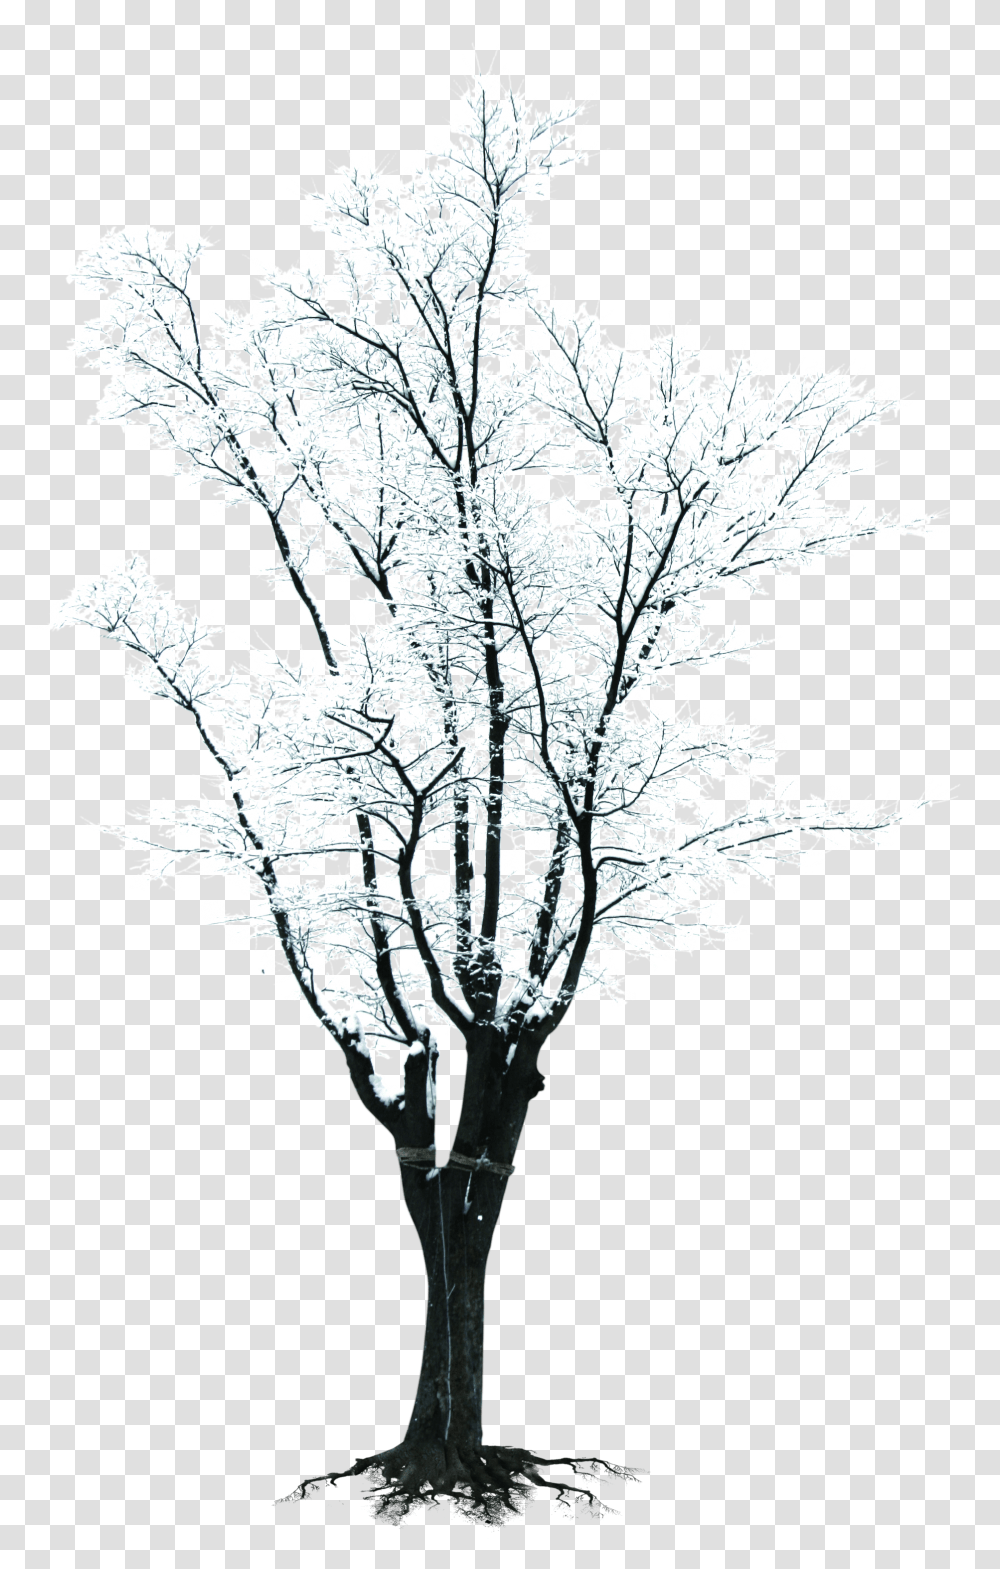 Black And White Tree Branch Clipart Banner Tree Branch Winter Snow Tree Clipart Transparent Png